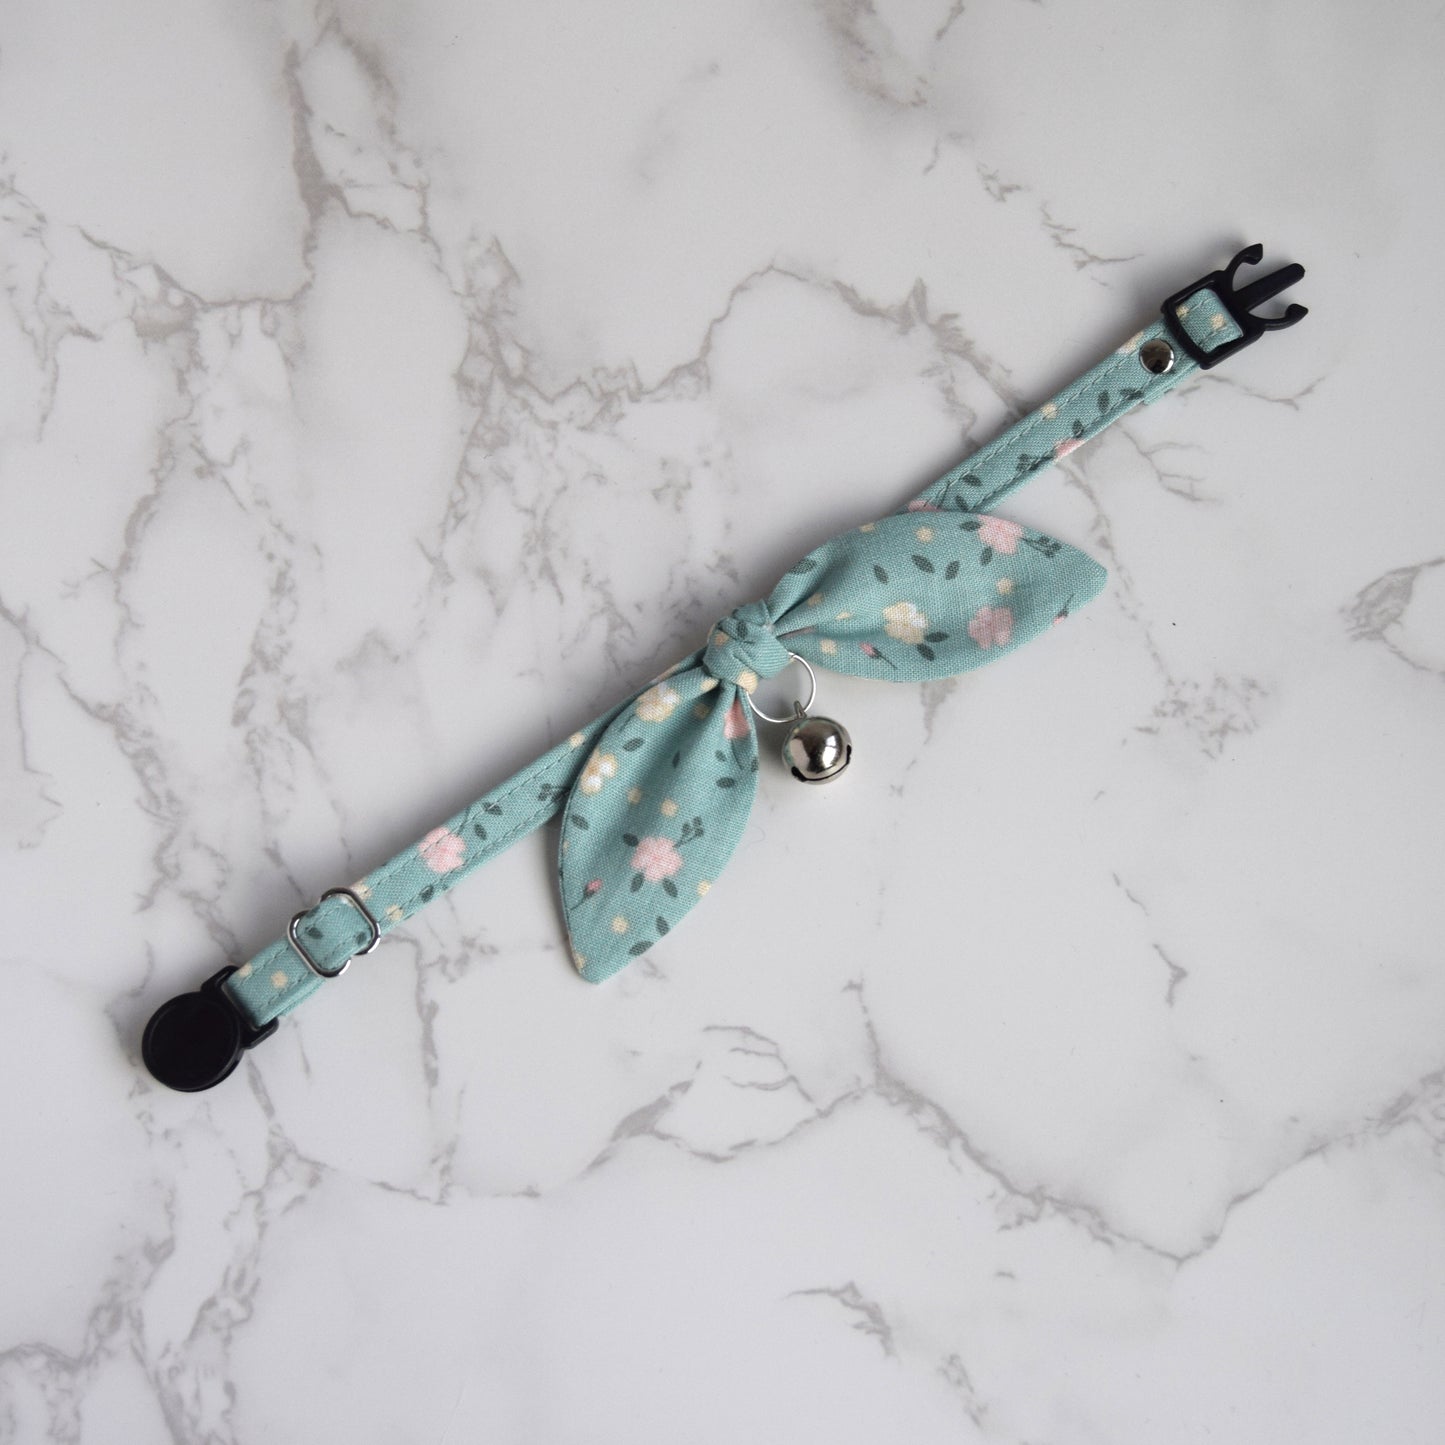 Sage Green Floral Bow Cat Collar